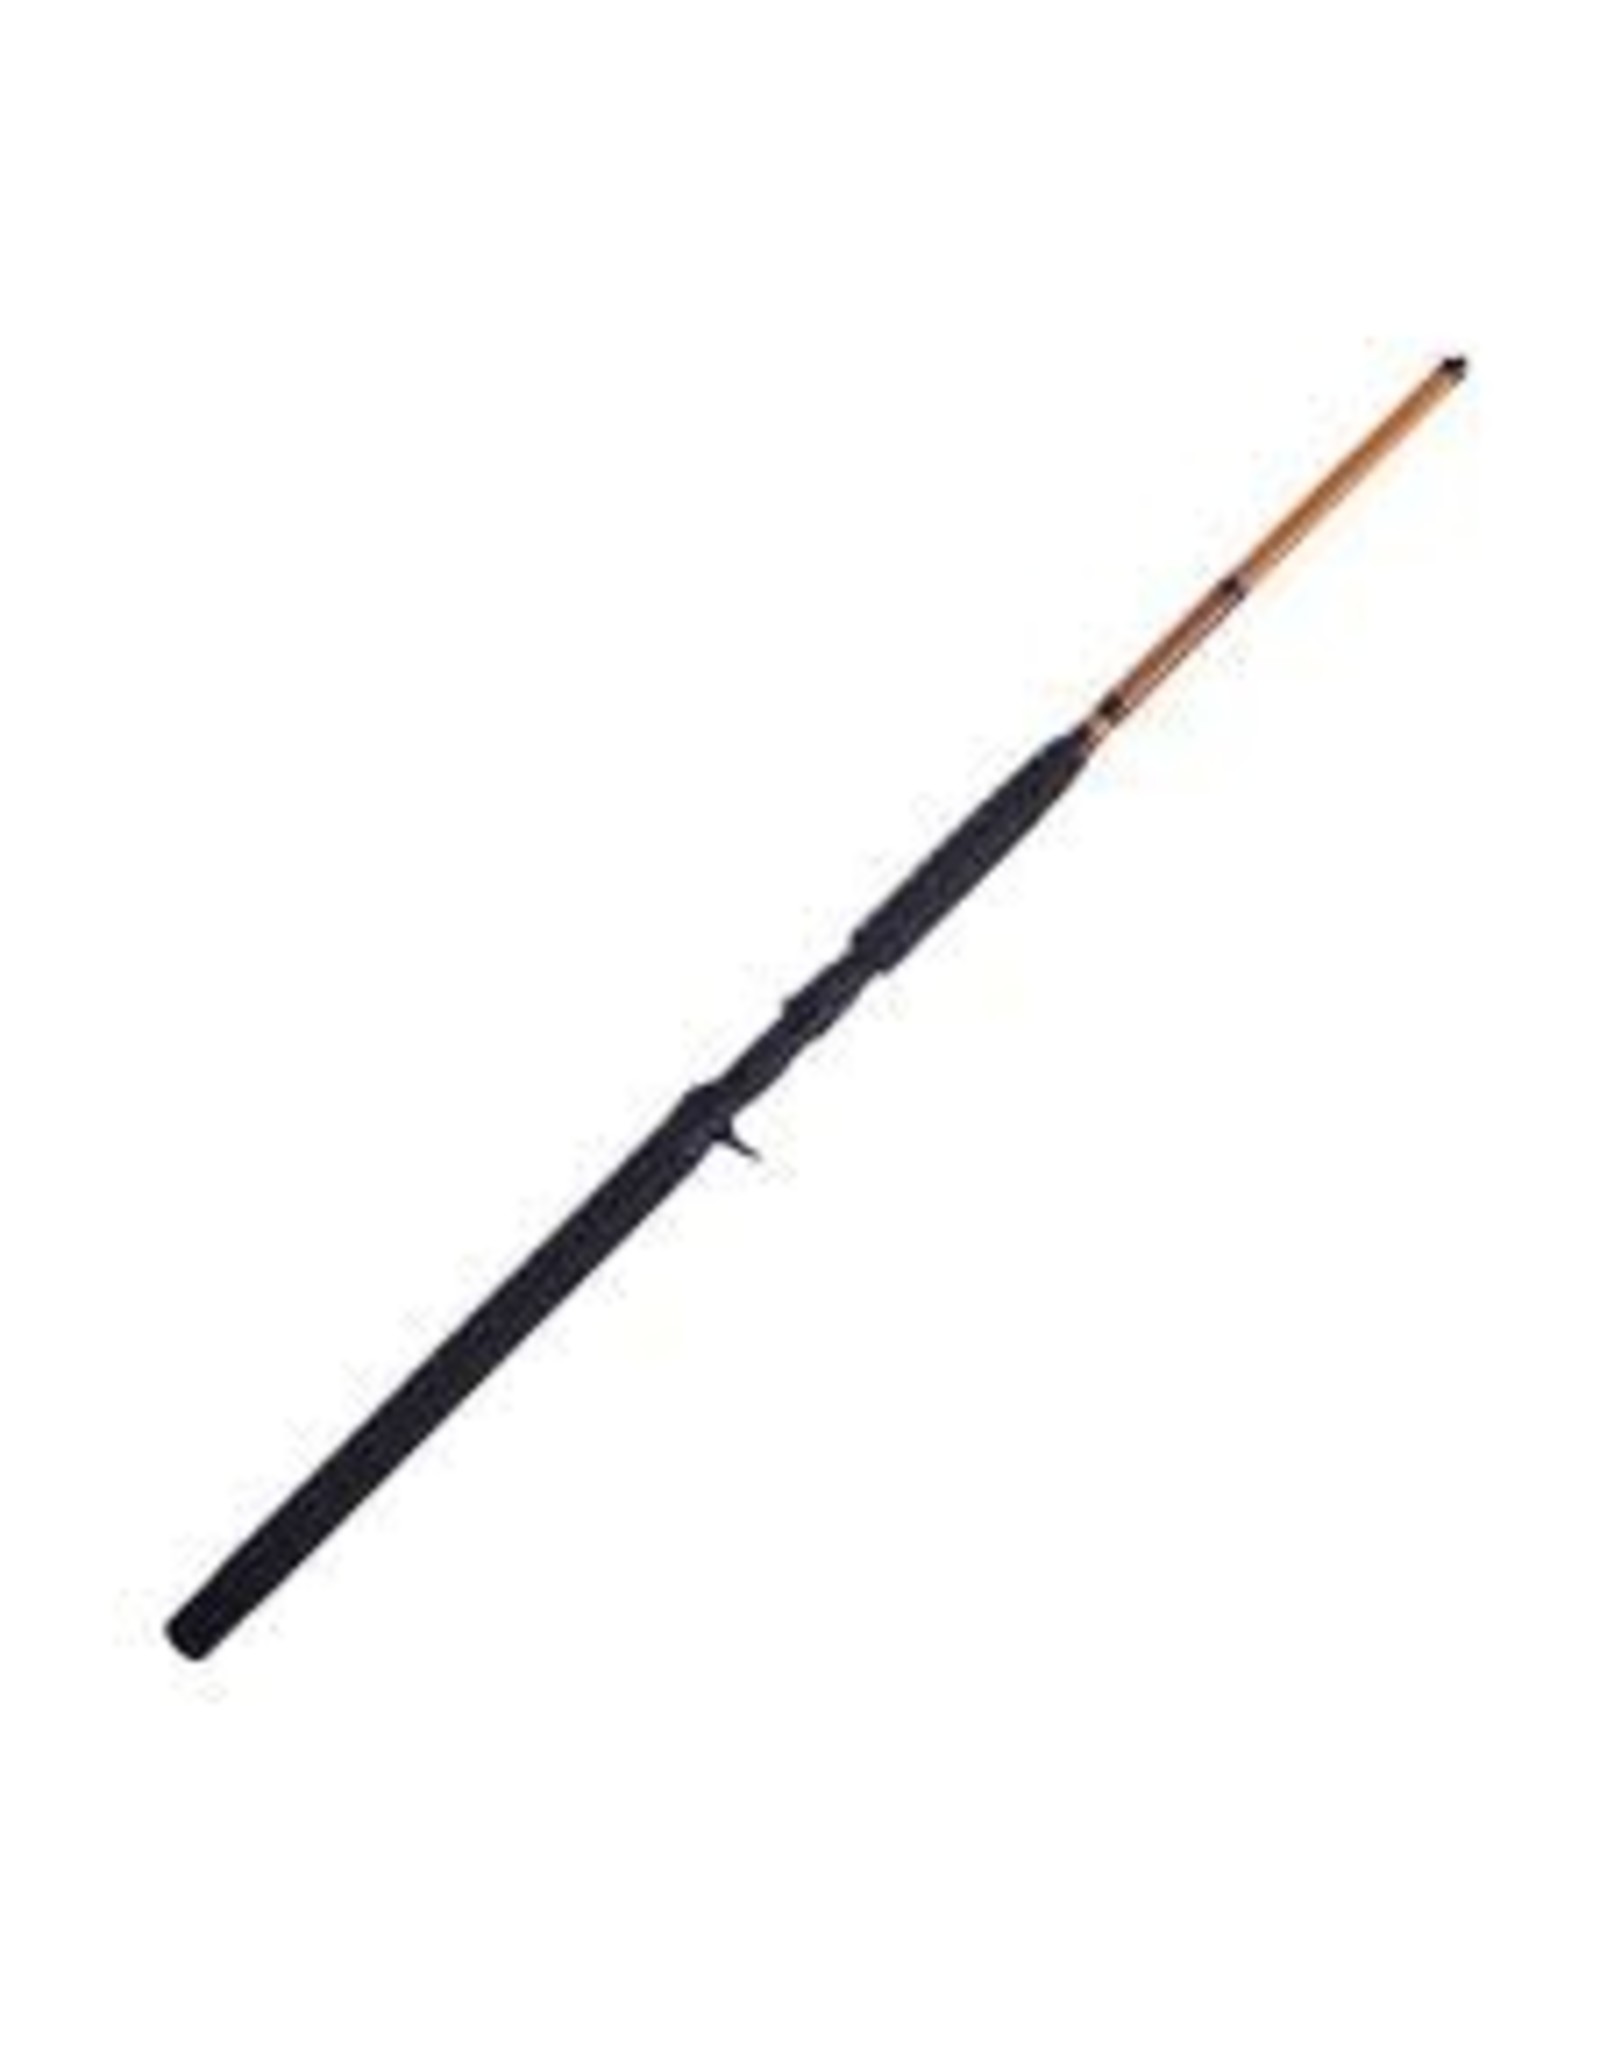 SHAKESPEARE SHA UGLY STIK CATFISH SPECIAL CASTING ROD - Prime Time Hunting